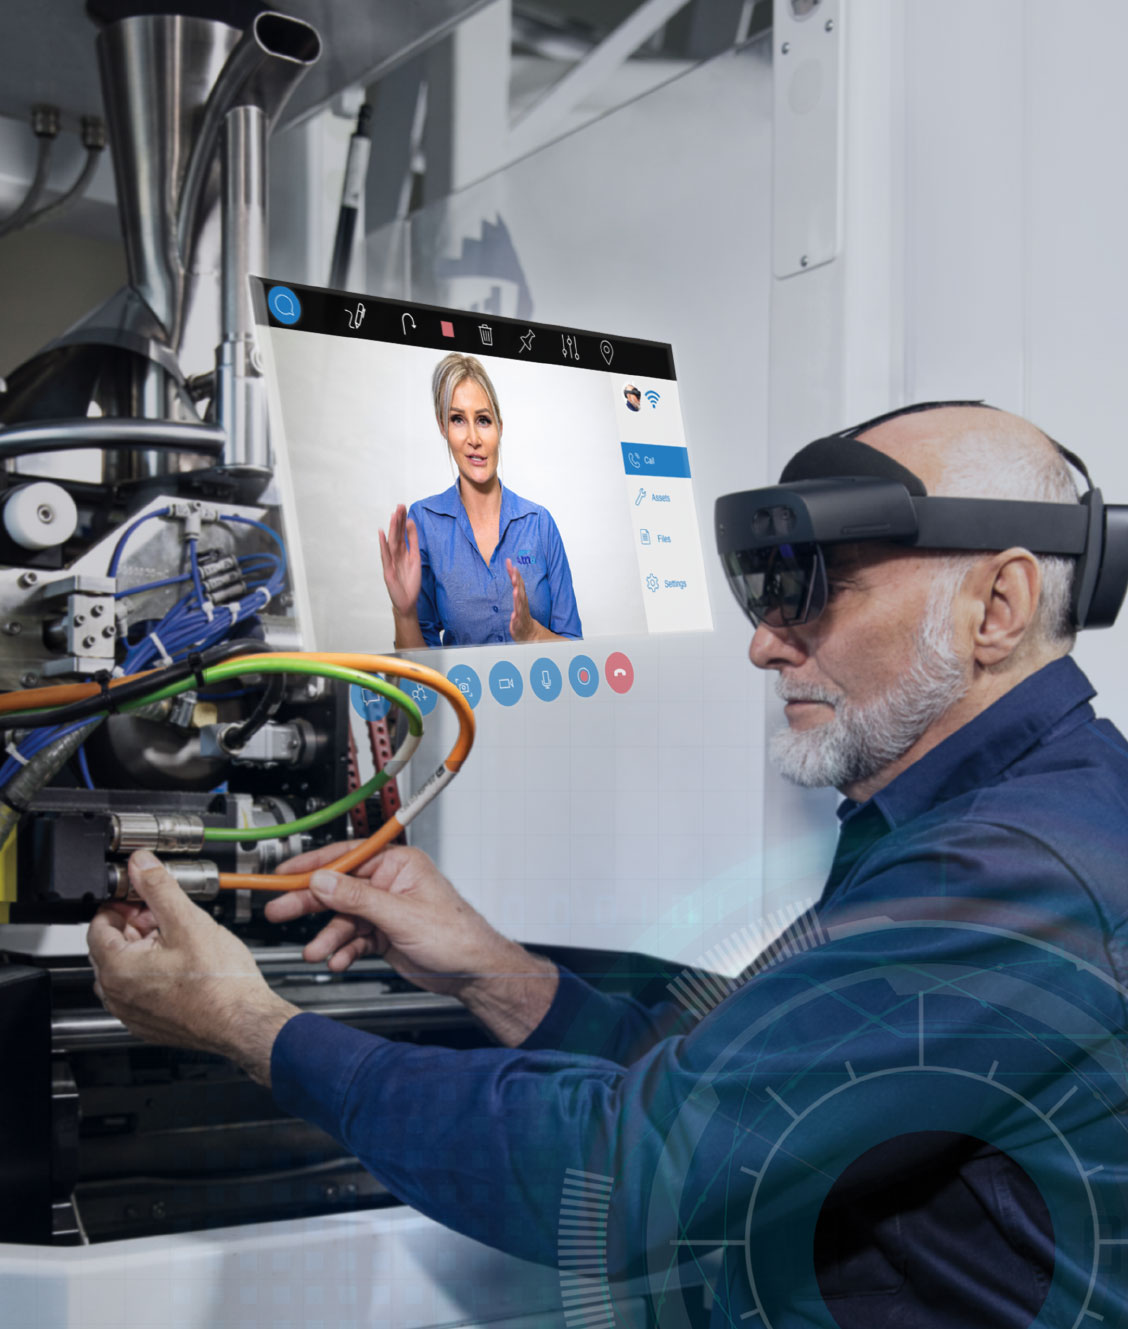 image of tna Solutions offering realtime remote support to customers using hololens technology